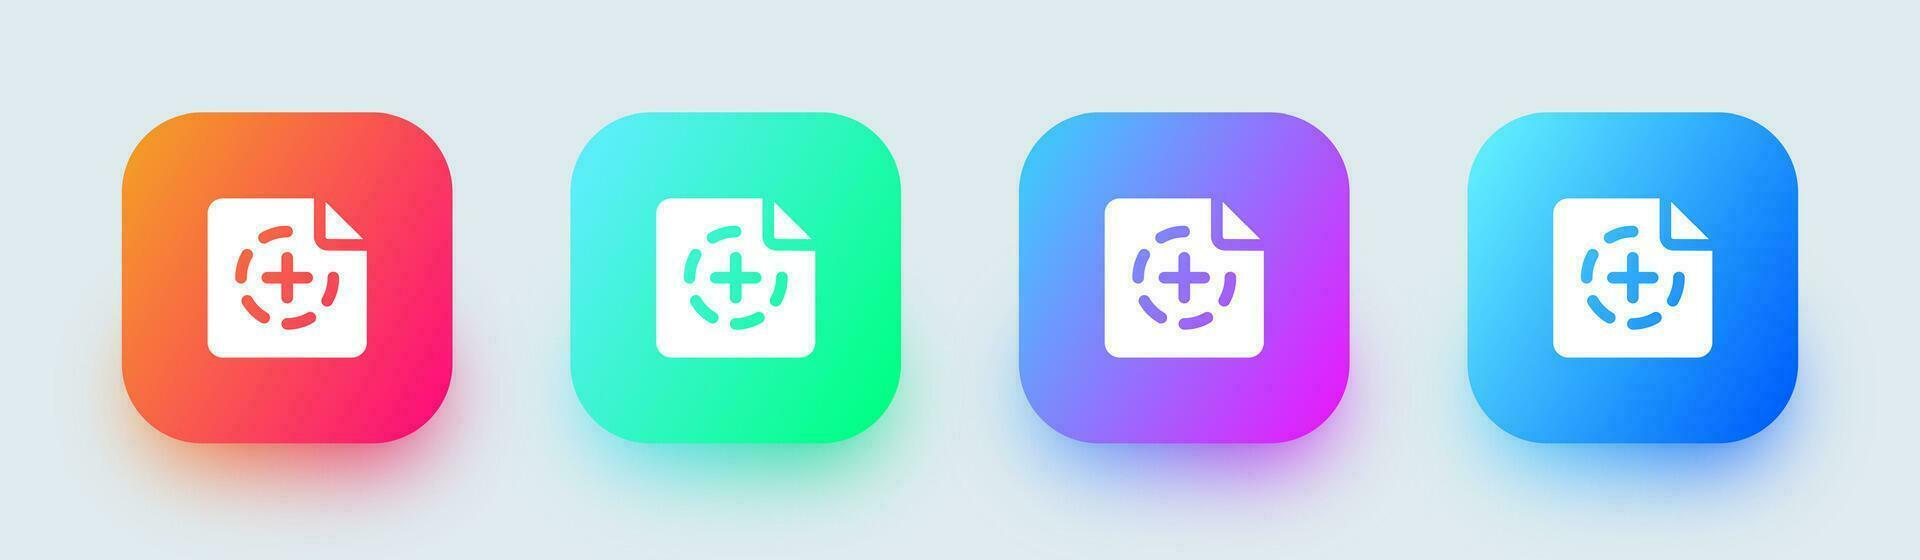 New solid icon in square gradient colors. document Add signs vector illustration.